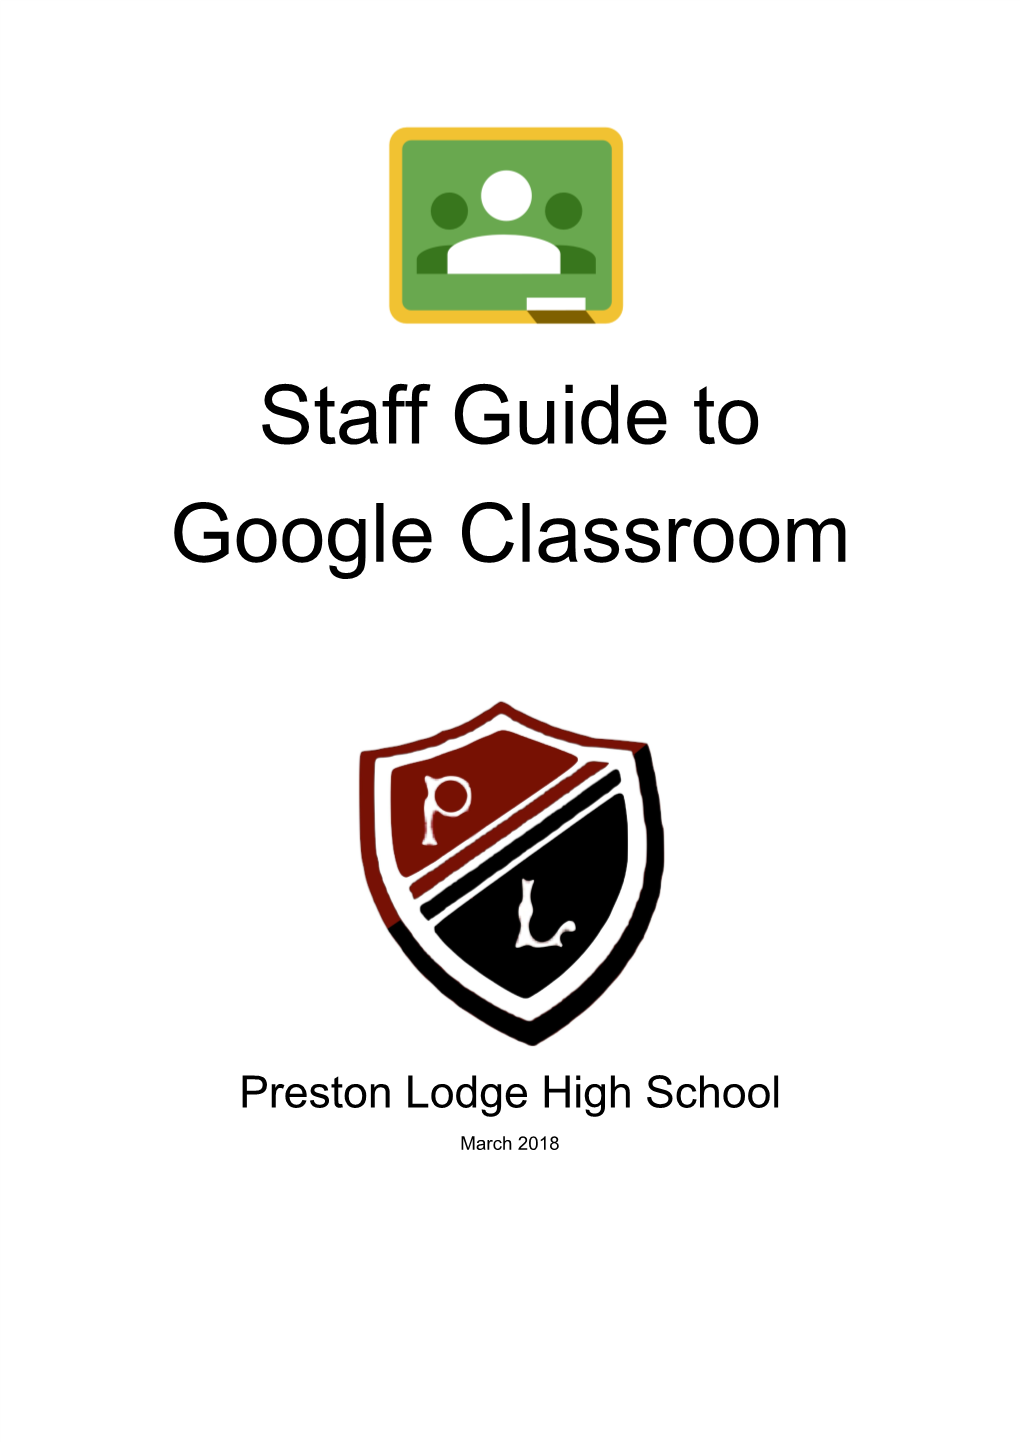 Staff Guide to Google Classroom